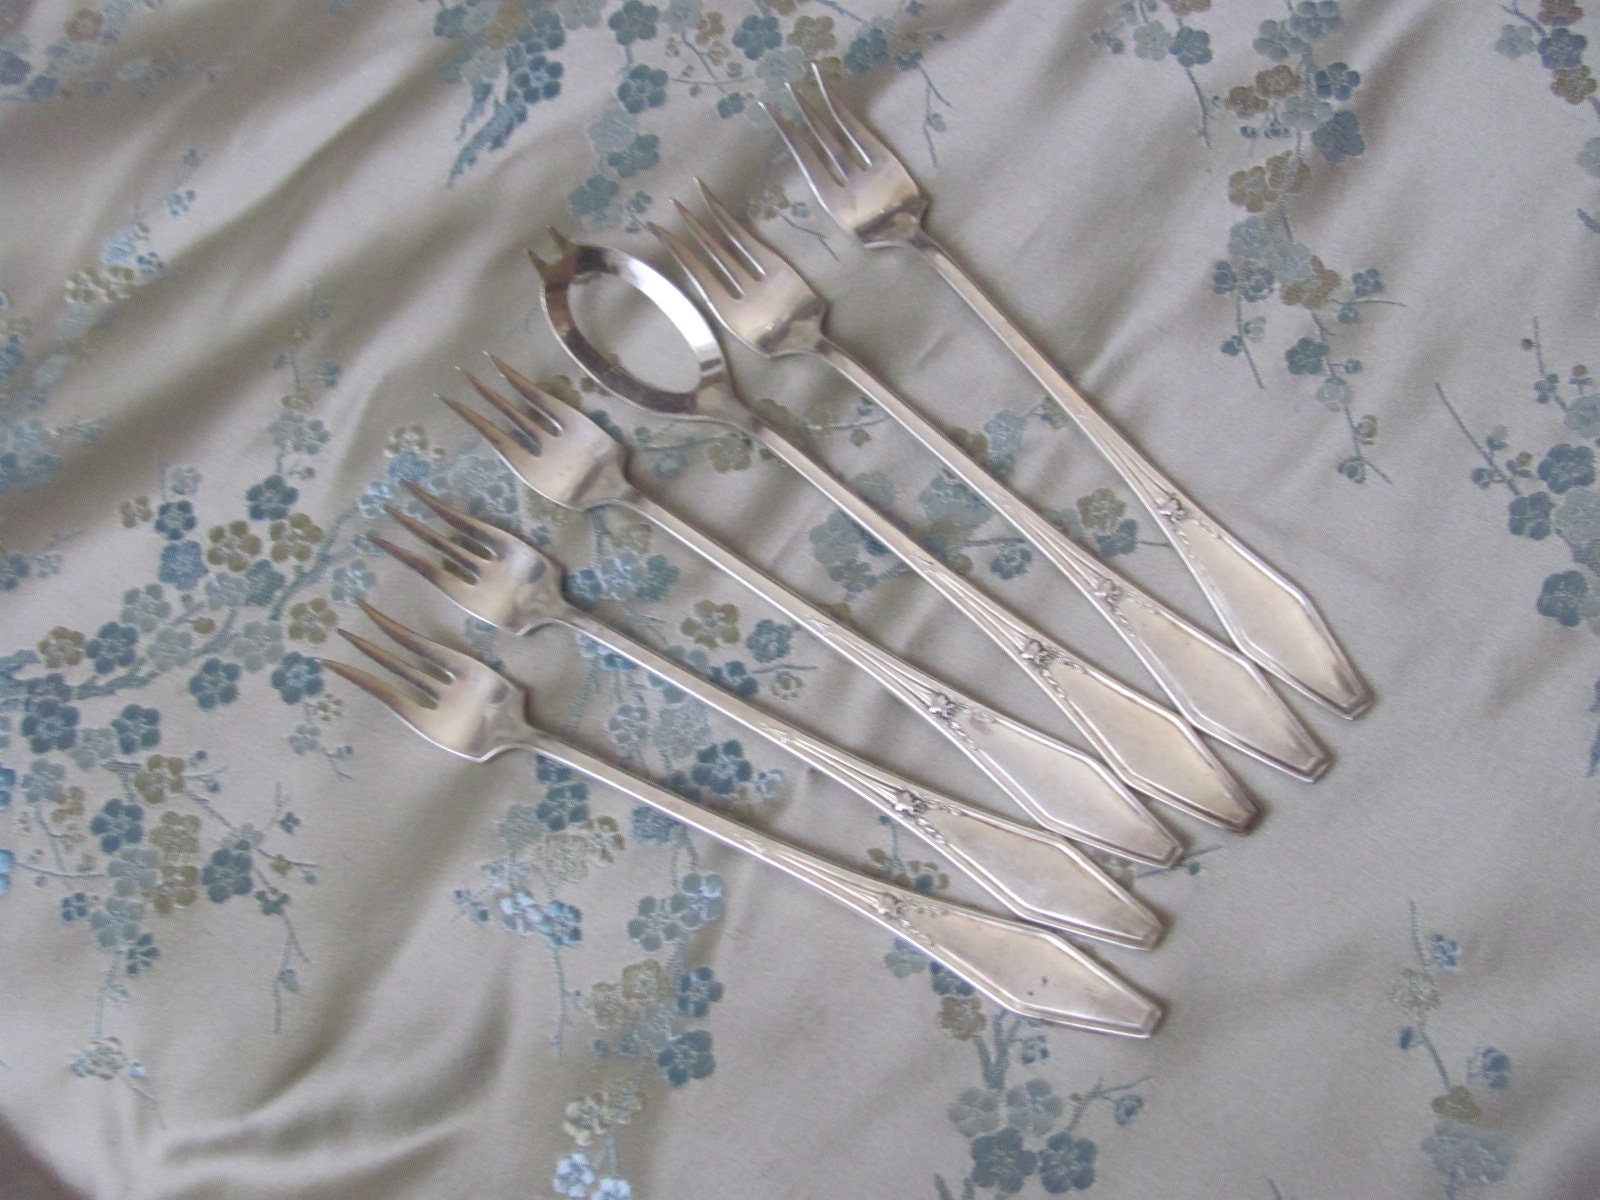 Crab Forks - Set Of 5 Silver Plate Seafood Cocktail + 1 Olive Spoon Jamestown 1916 Pattern